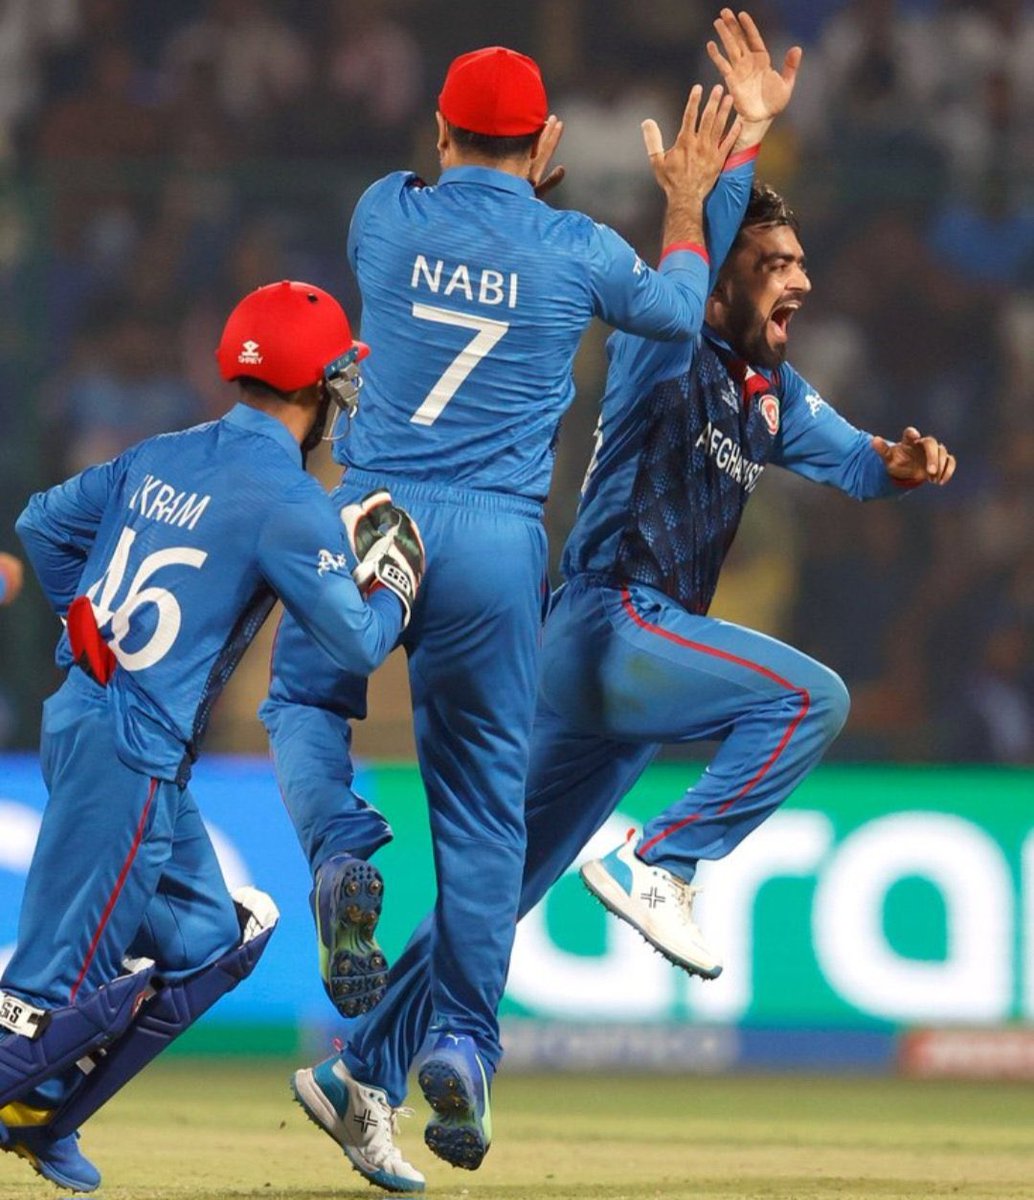 Afganistan win against the world champions England is such a positive for world cricket. Gurbaz, Mujeeb, Rashid, nabi mein bahut daam hai. Happy for the passionate Afganistan fans who never give up on their team. ❤️ #ENGvAFG #ICCCricketWorldCup23